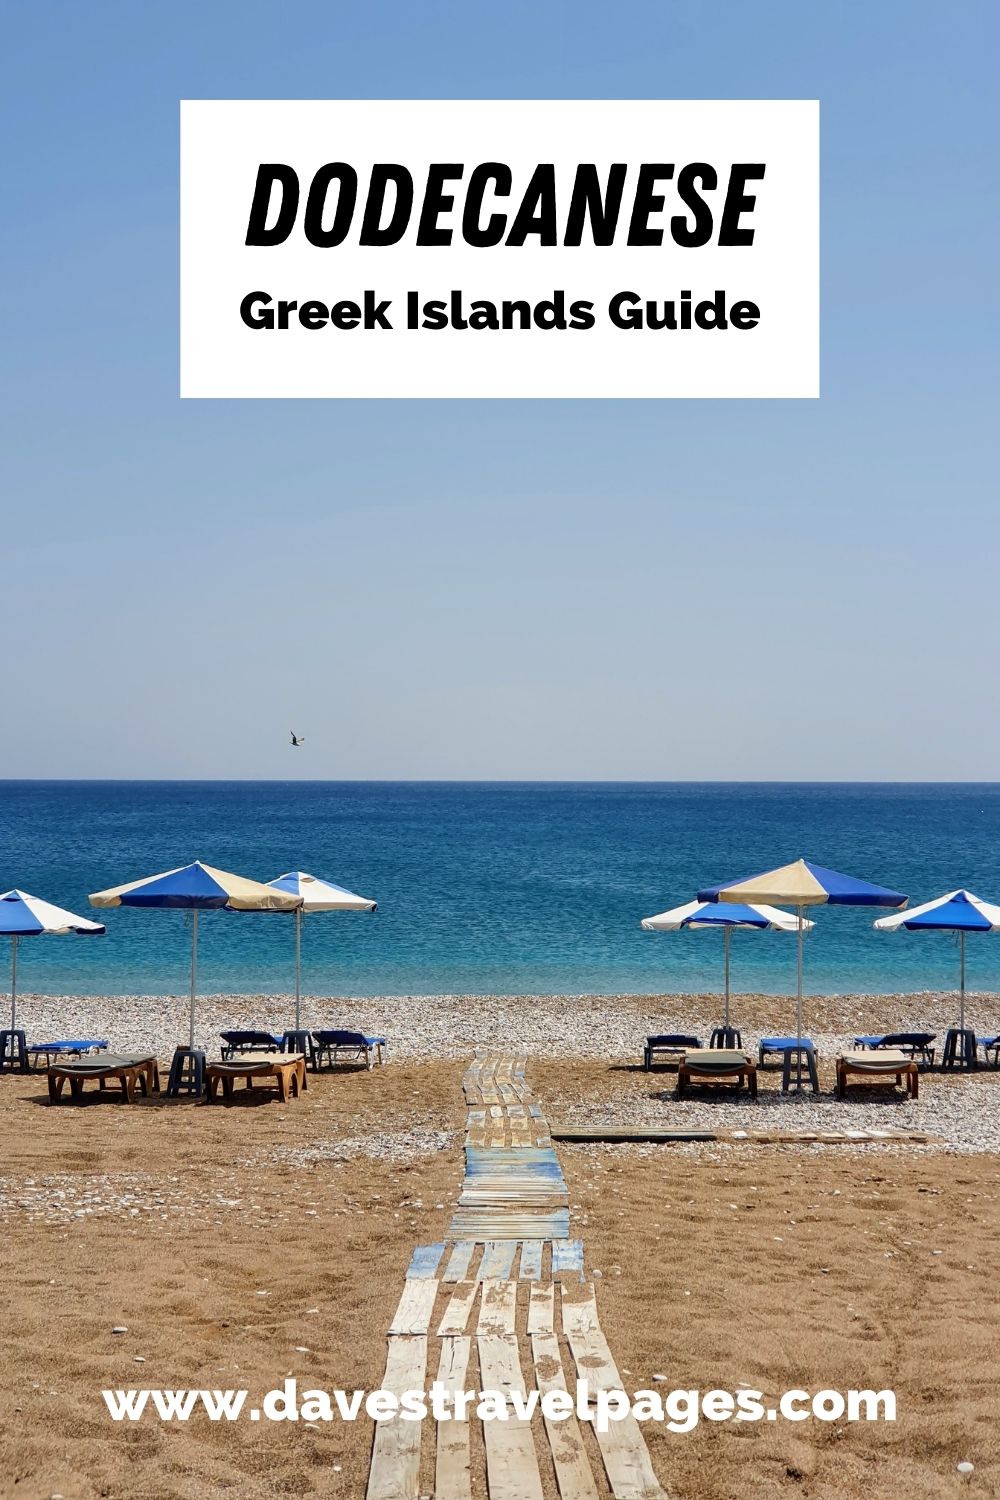 Dodecanese Greek Islands Guide